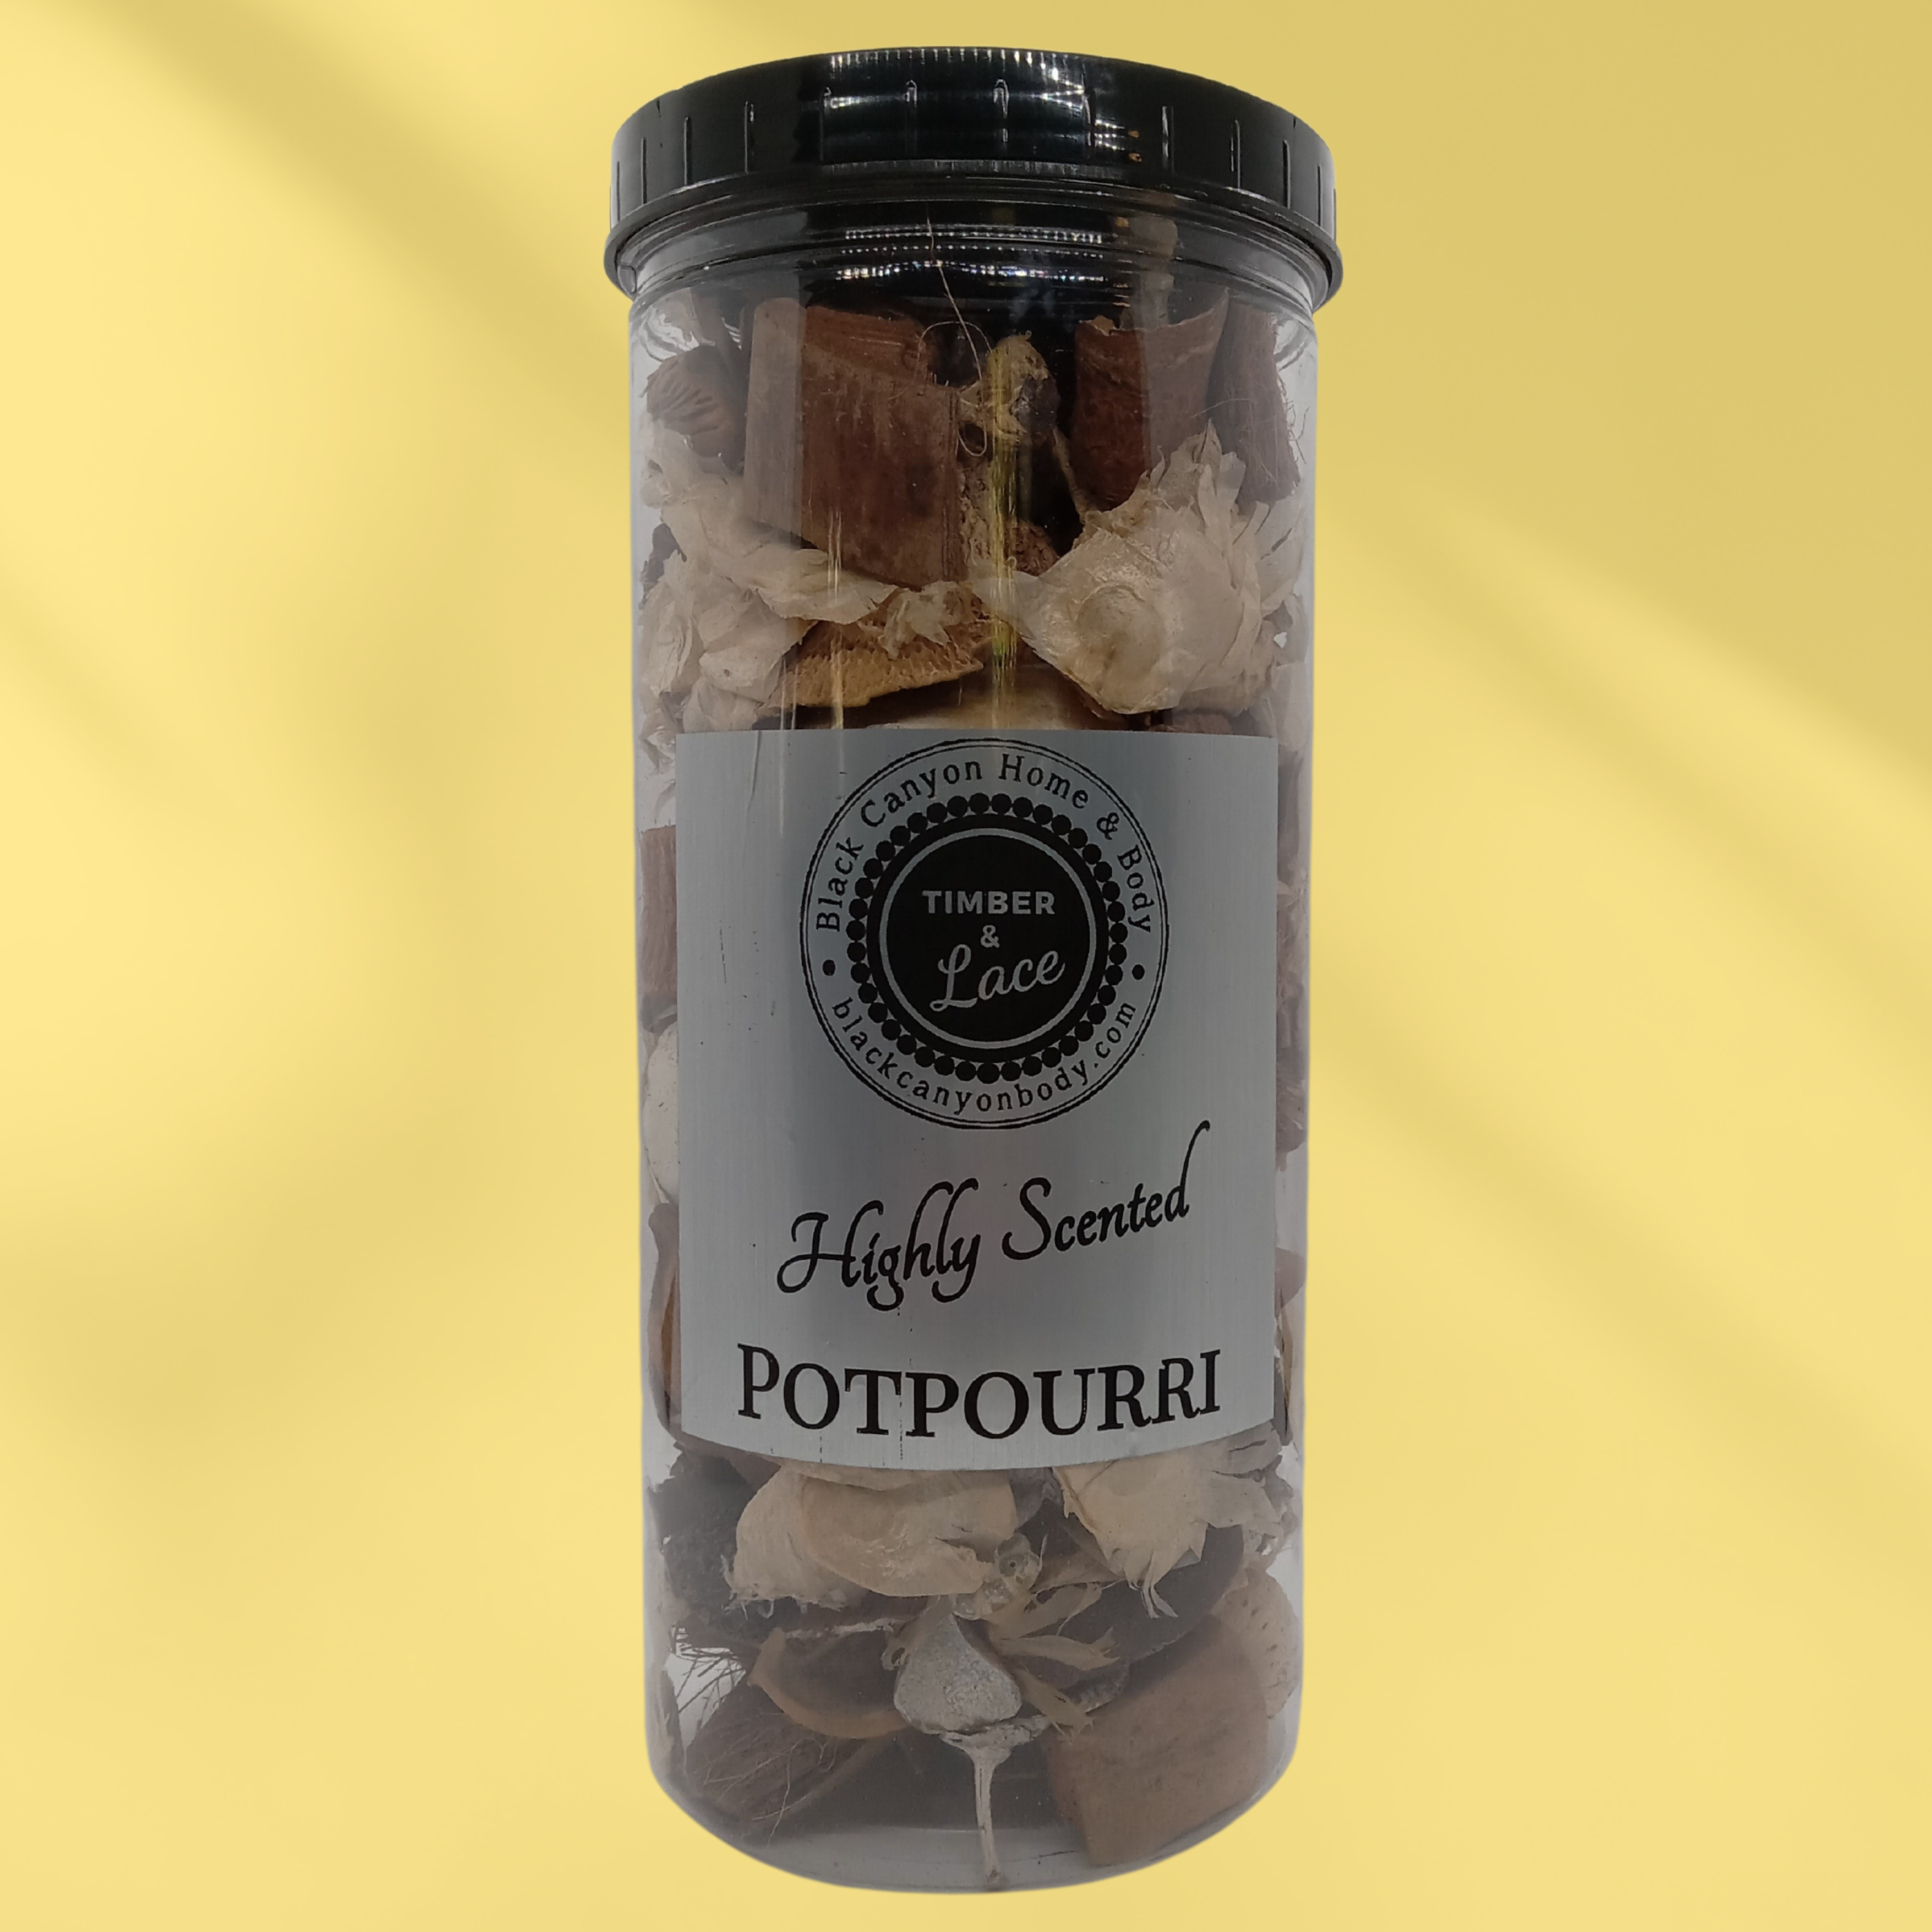 Timber & Lace Hot Cocoa Scented Potpourri